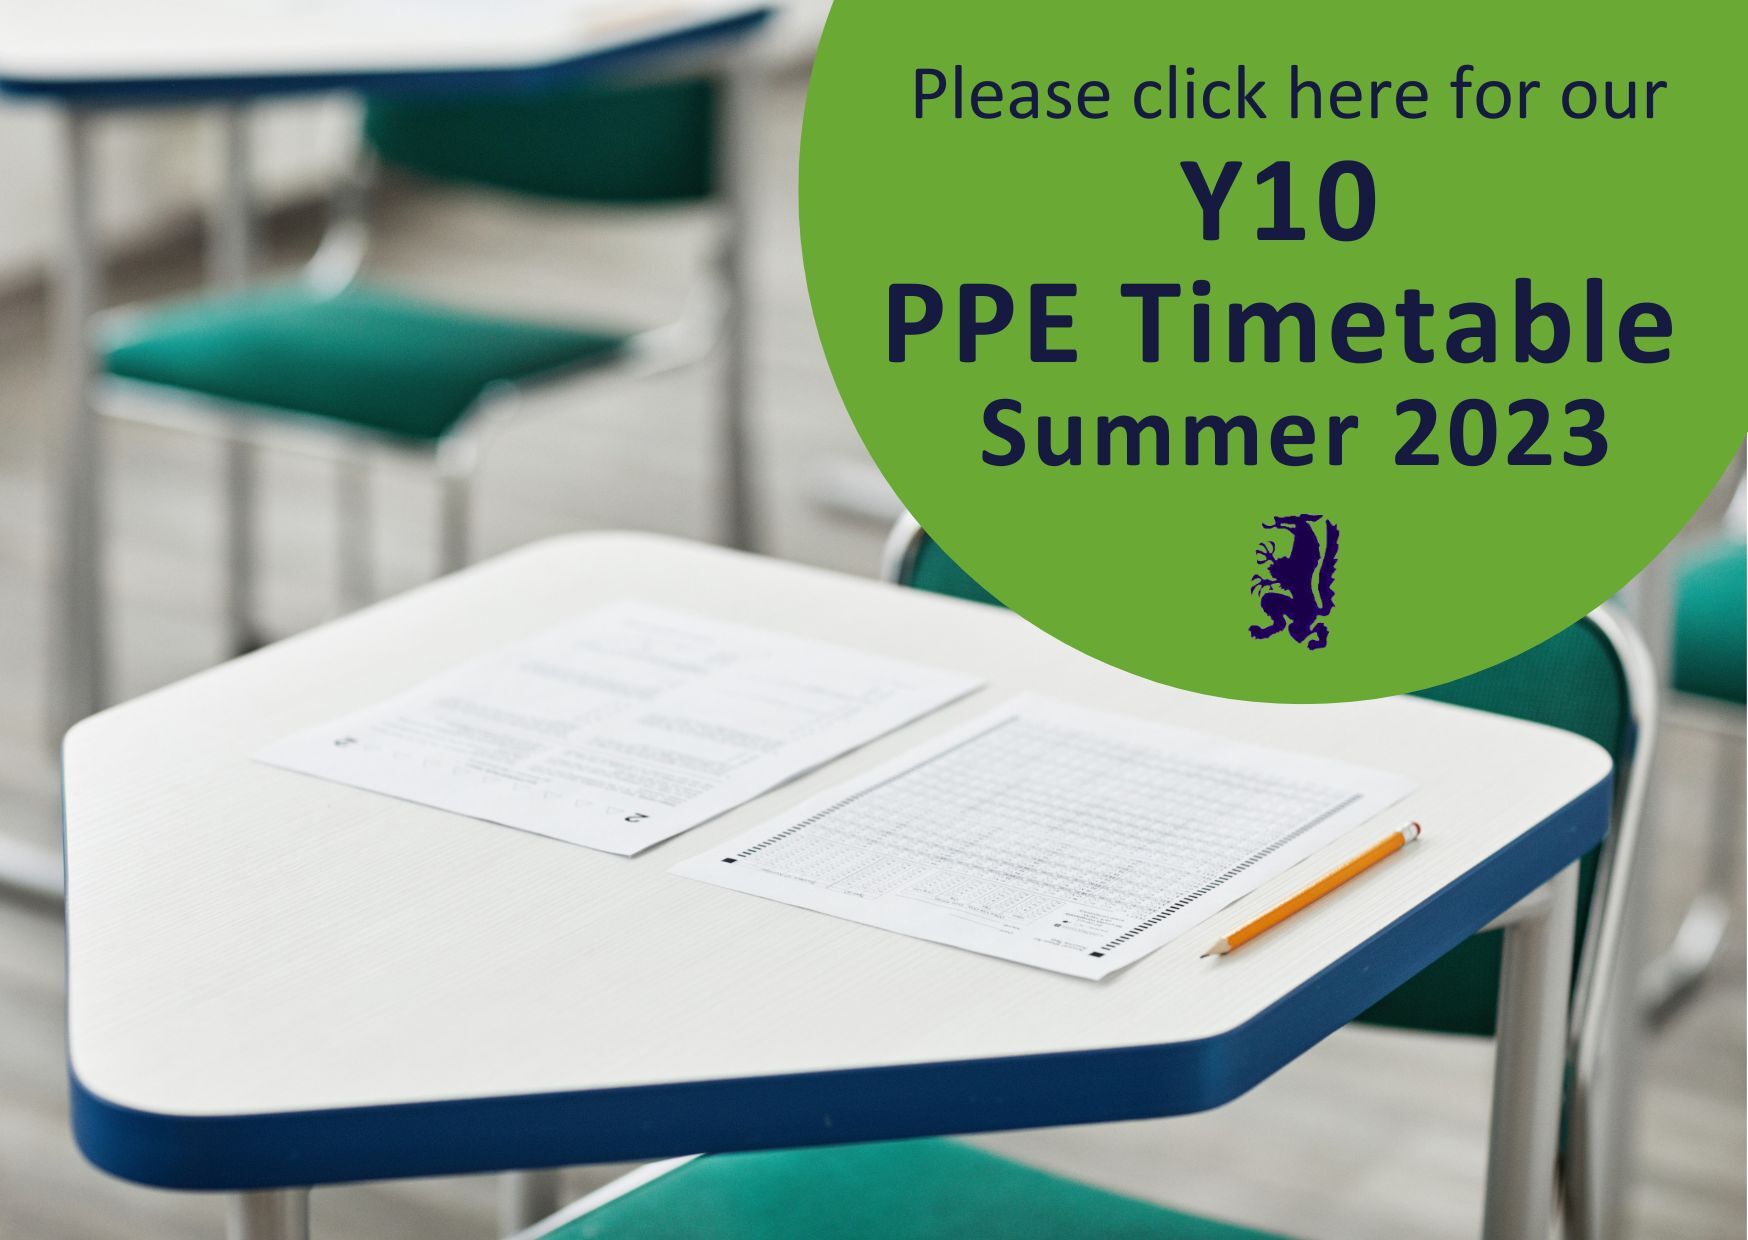 Summer y10 ppe timetable image